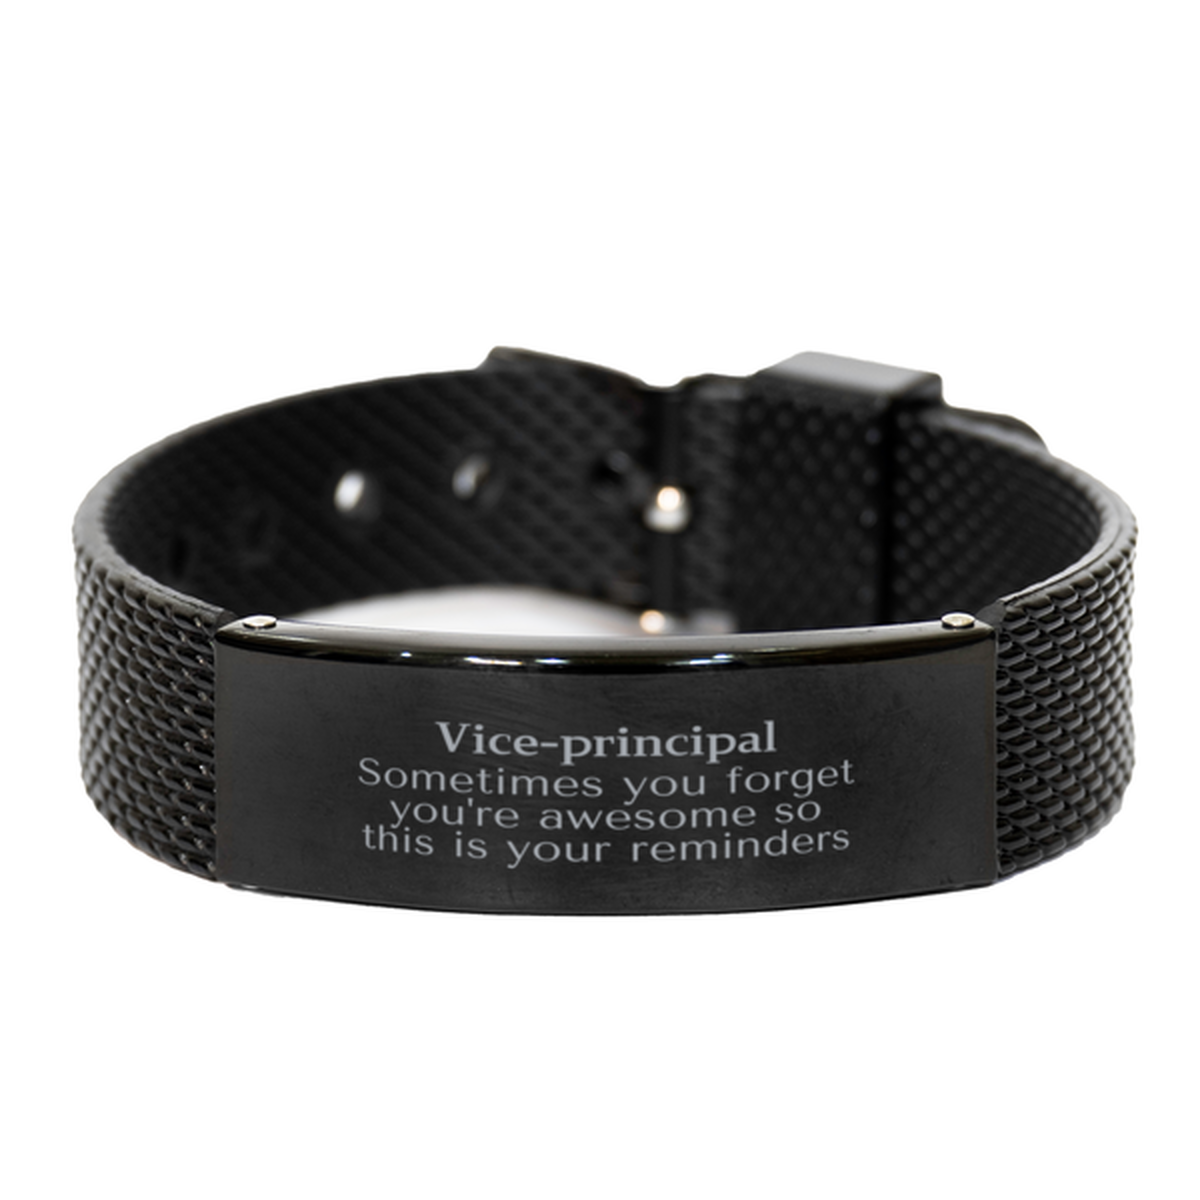 Sentimental Vice-principal Black Shark Mesh Bracelet, Vice-principal Sometimes you forget you're awesome so this is your reminders, Graduation Christmas Birthday Gifts for Vice-principal, Men, Women, Coworkers